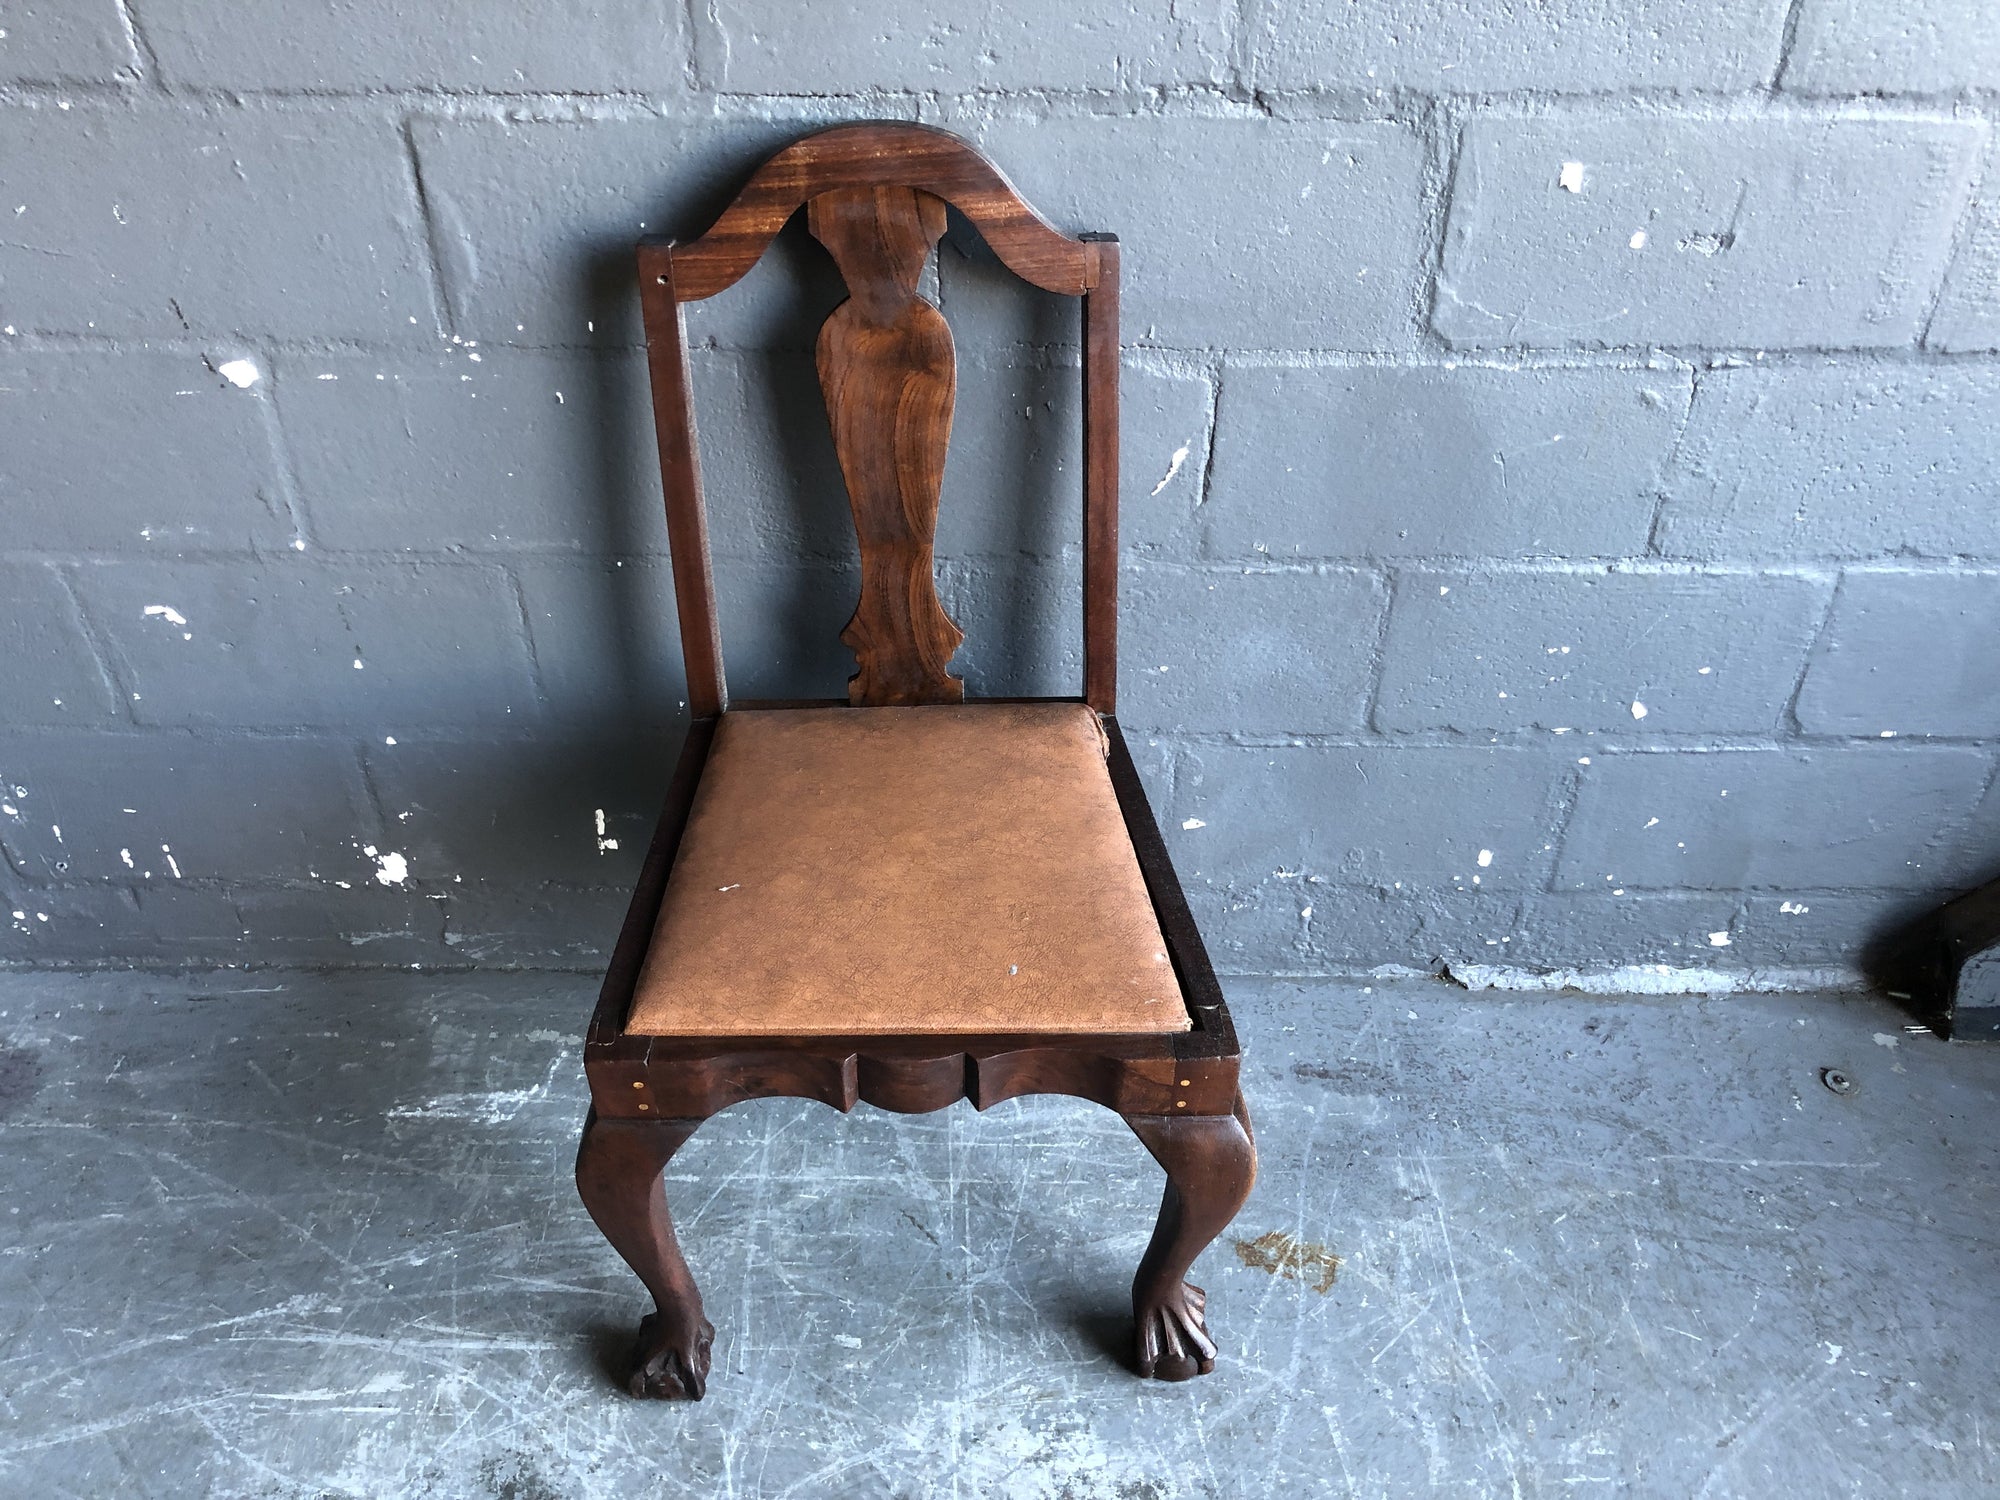 Ball and claw Dining Chair with orange cushion seating - 2ndhandwarehouse.com